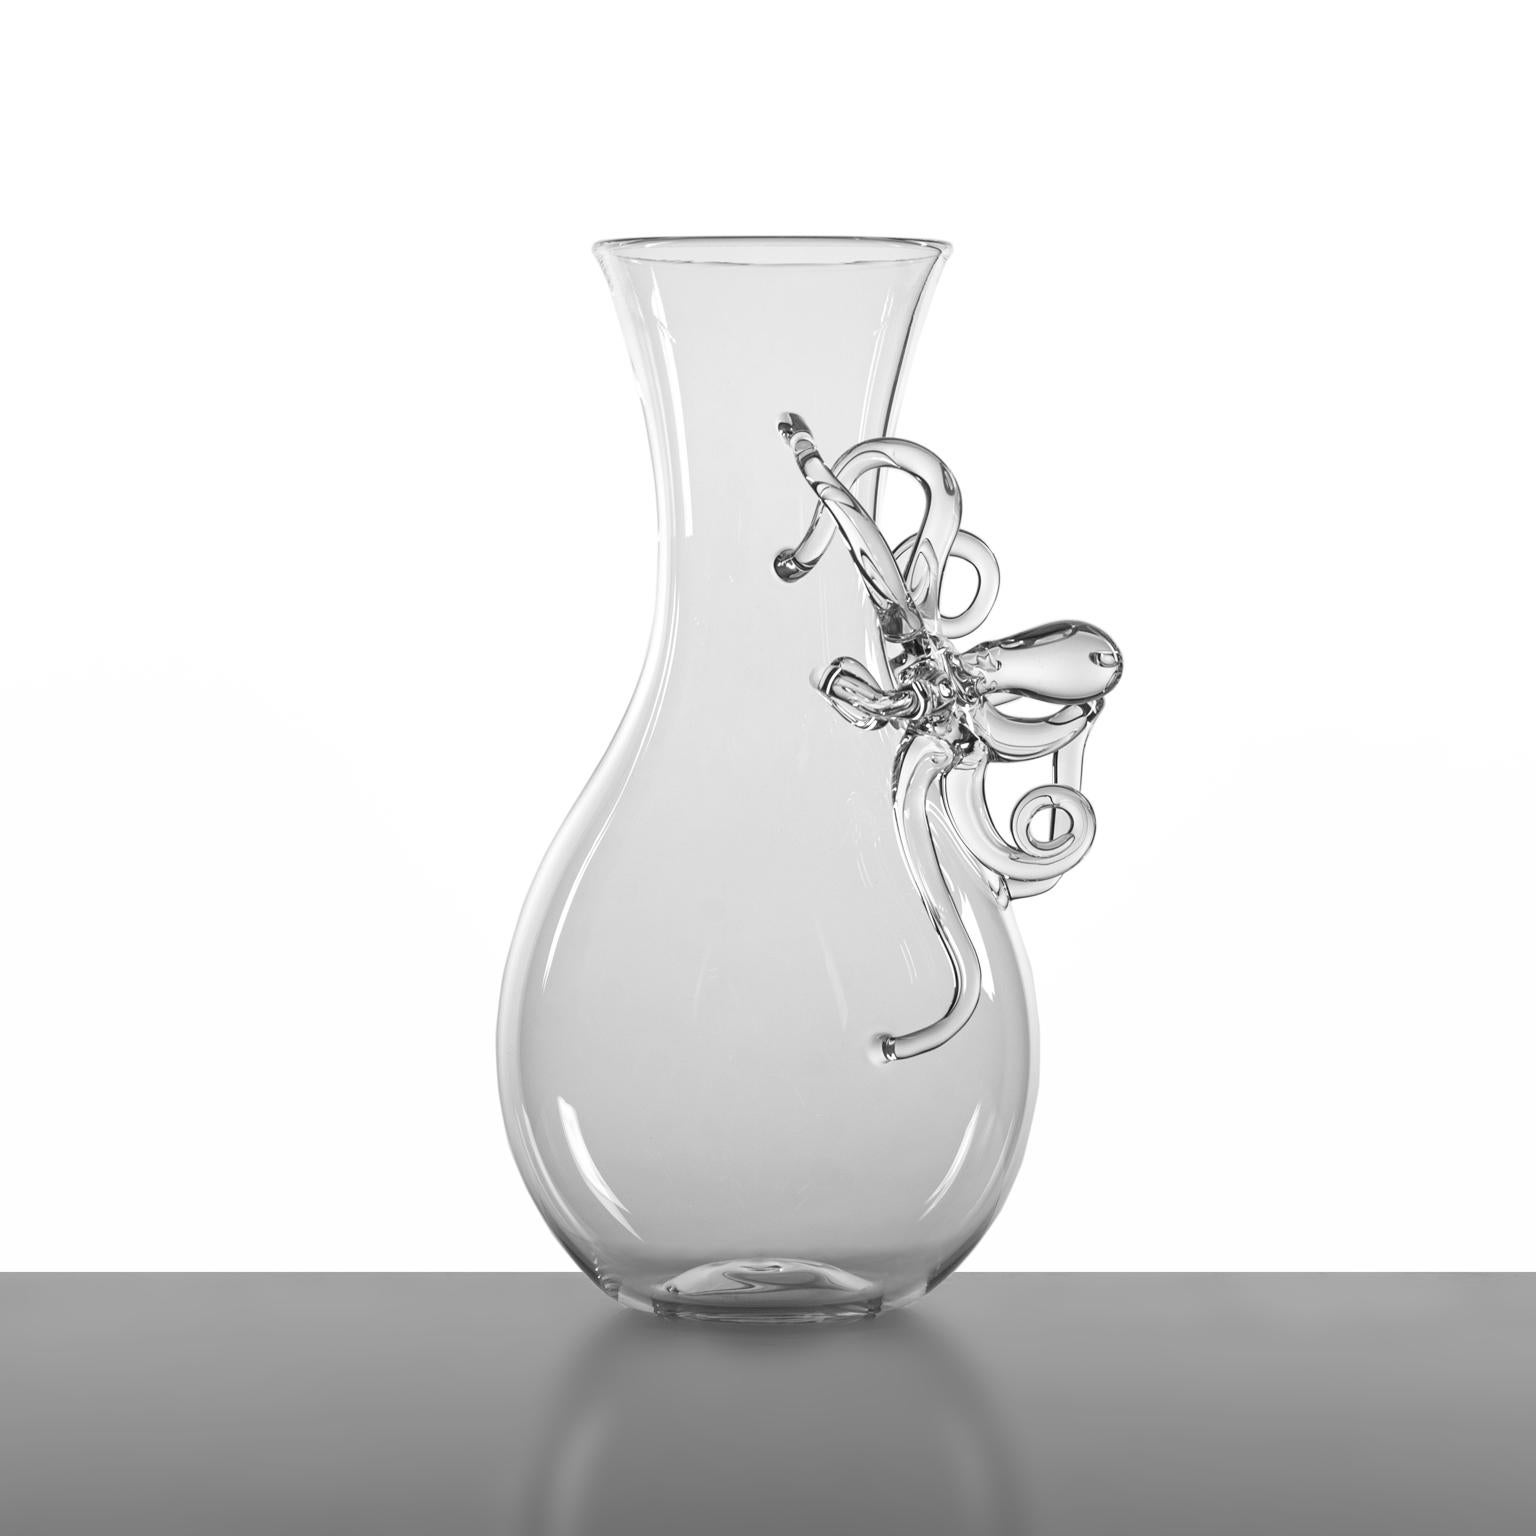 'Piovra Pitcher'
A Hand Blown Glass Pitcher by Simone Crestani
Piovra Pitcher is one of the pieces from the Polpo Collection.

